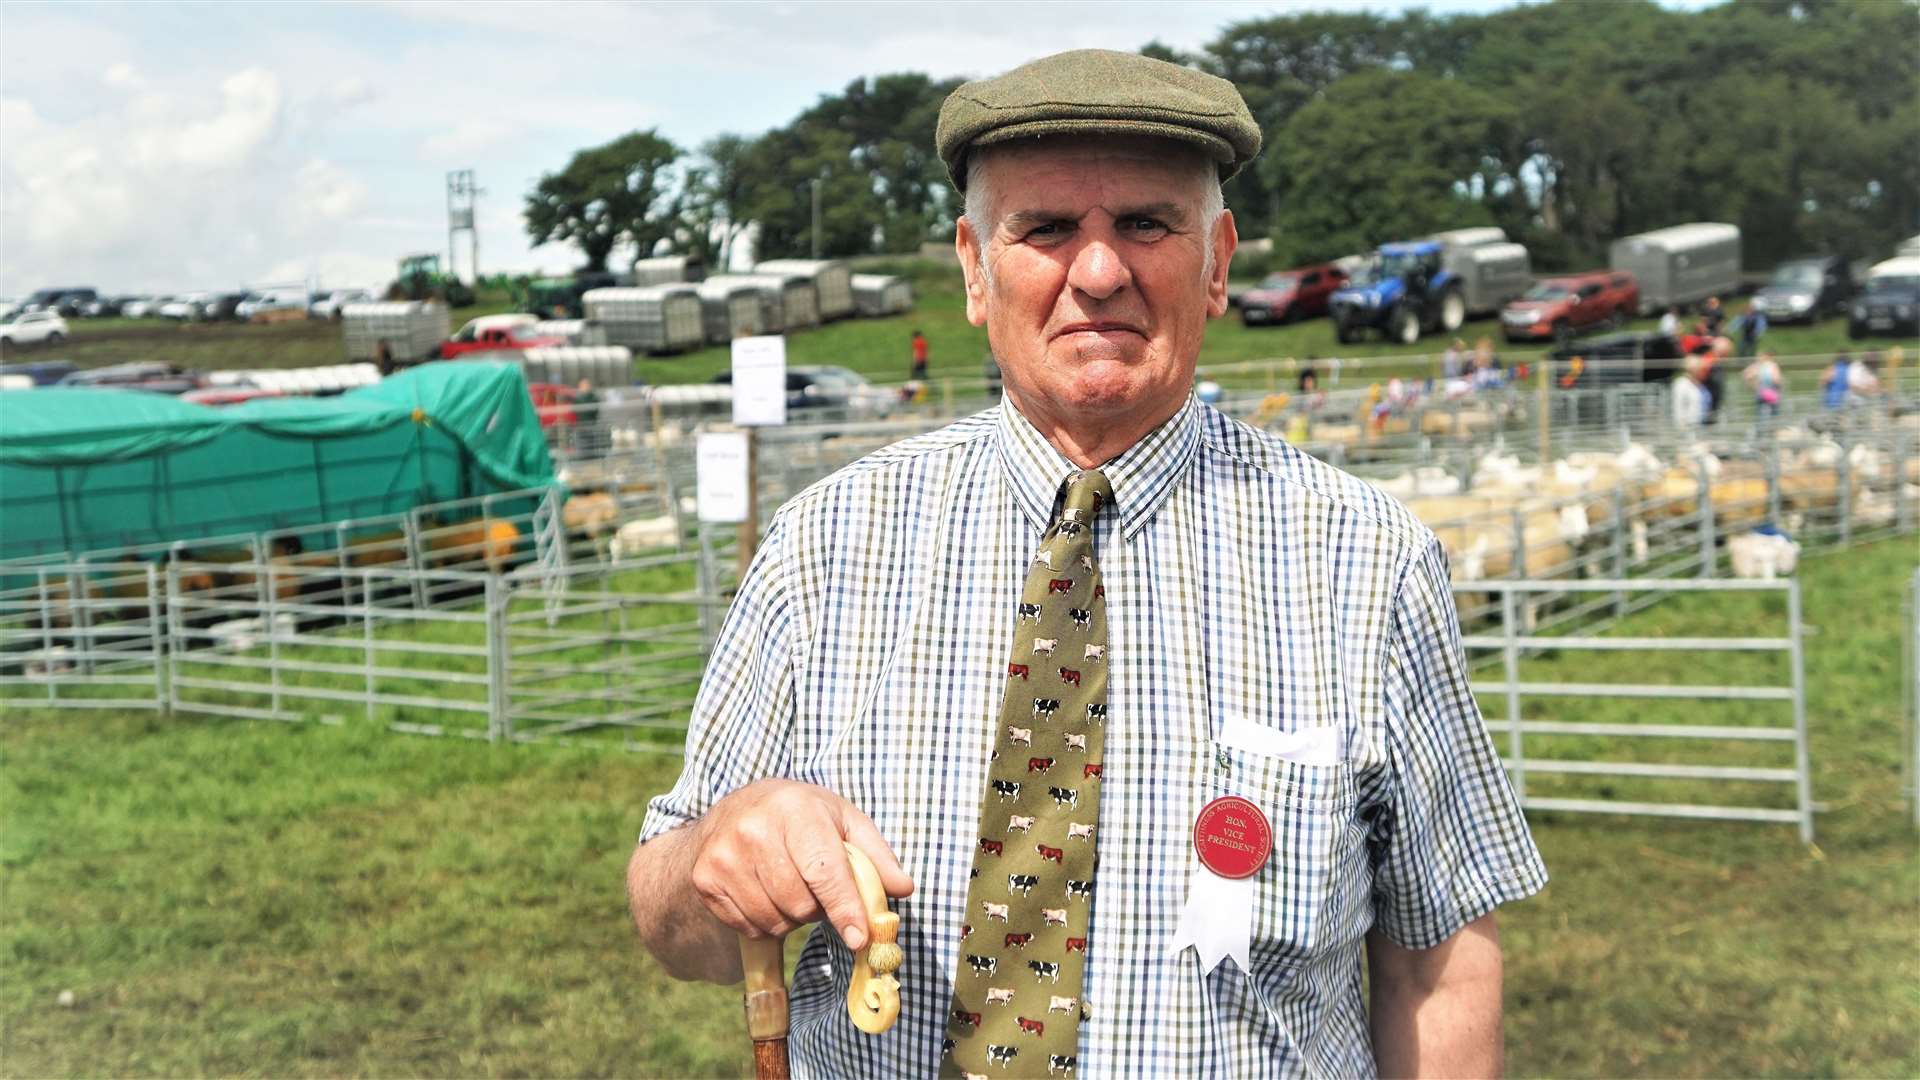 Kenneth Sutherland Snr is an honorary vice-president of the County Show and the overall champion sheep came from his farm at Stainland and Sibmister. Picture: DGS